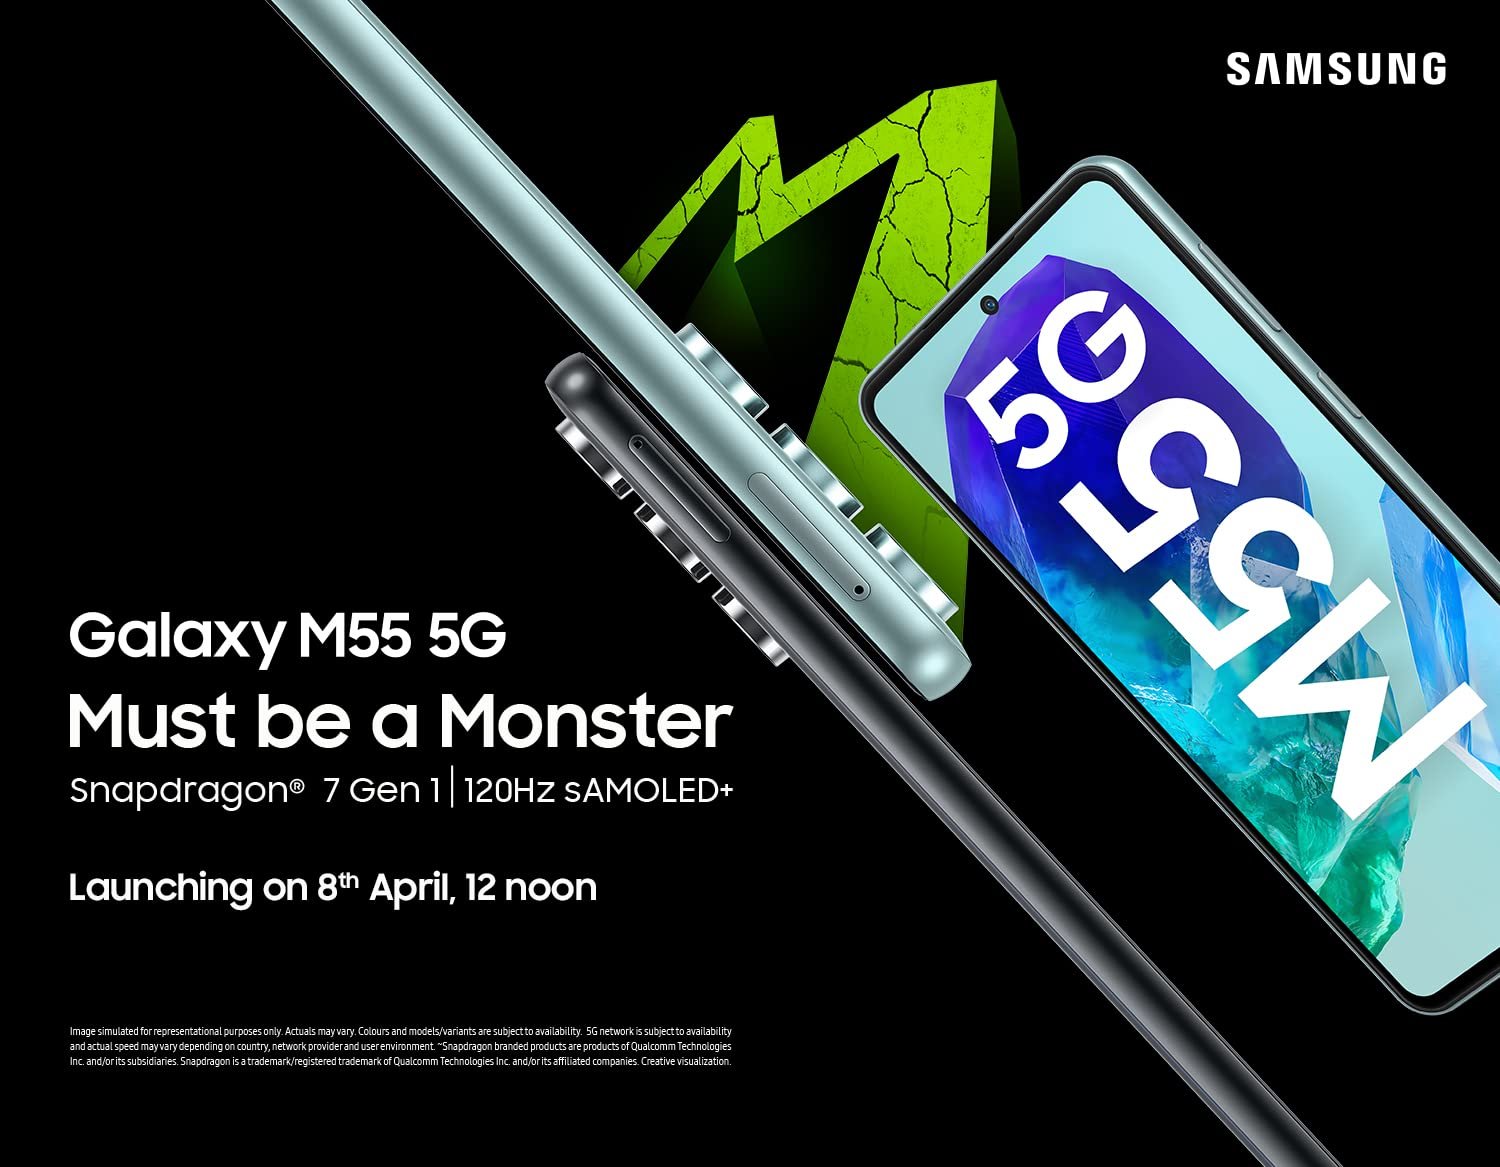 Samsung Galaxy M55 5G confirmed to launch in India